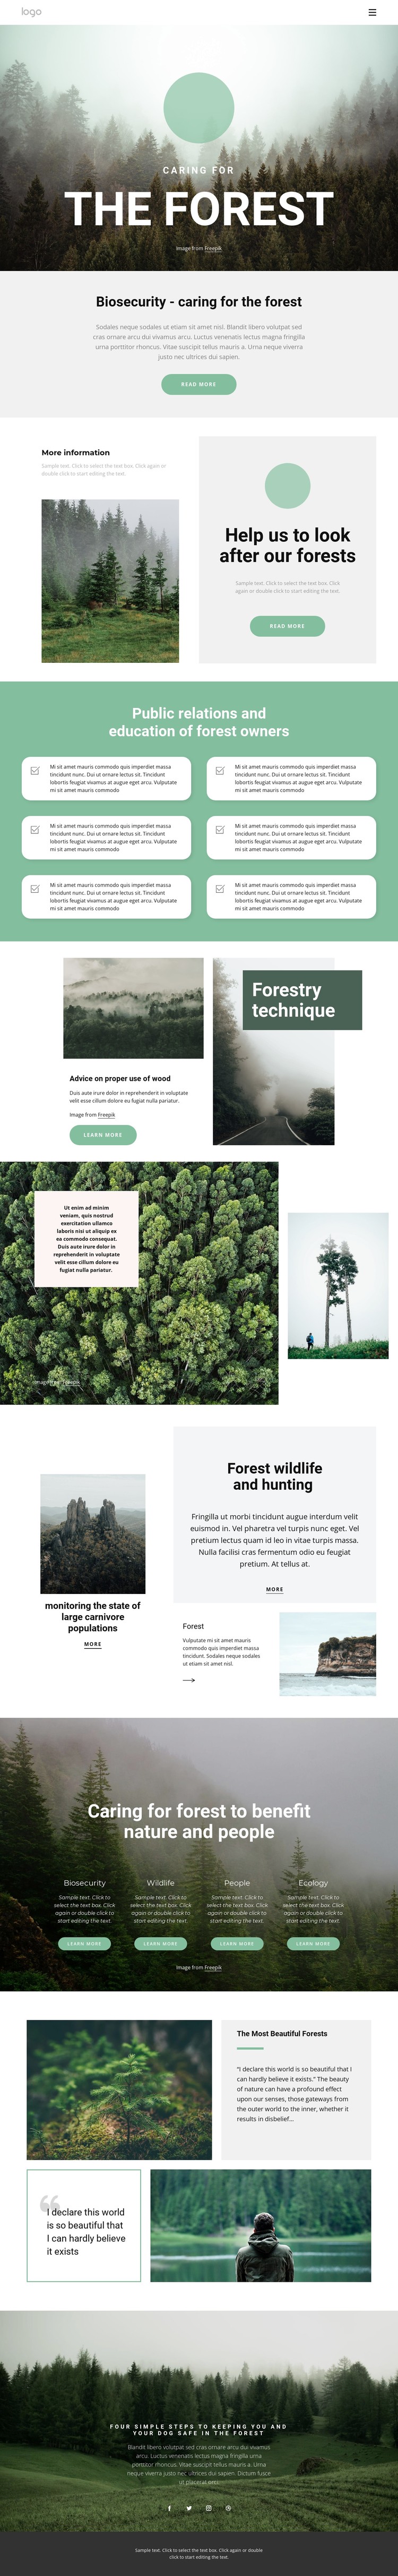 Caring for parks and forests Static Site Generator